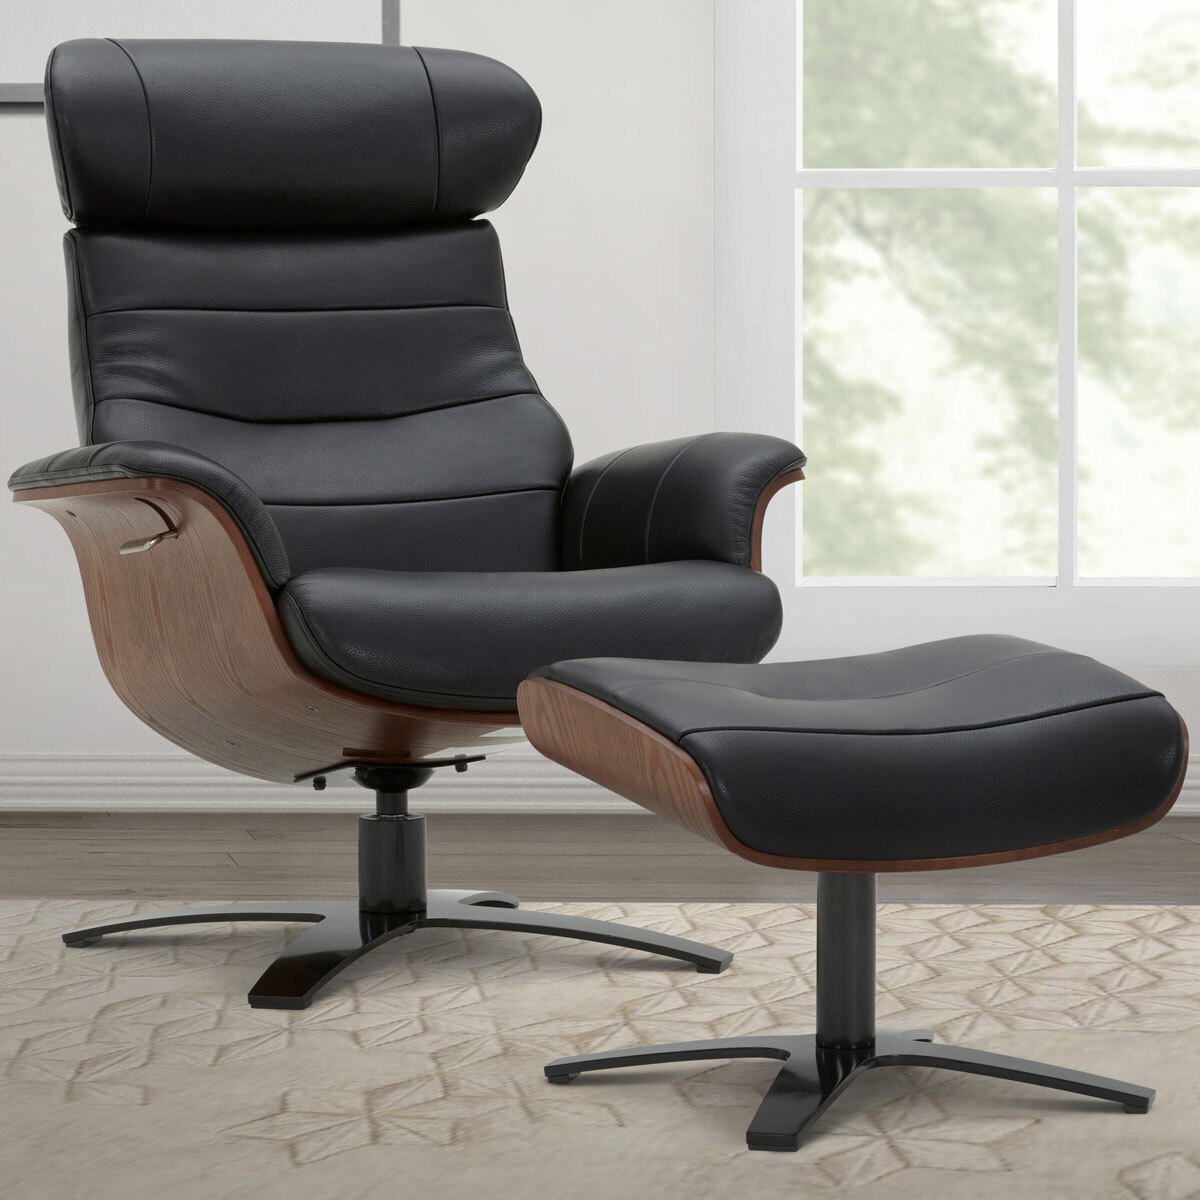 Karma Black Leather Swivel Chair, Red Leather Chair Costco